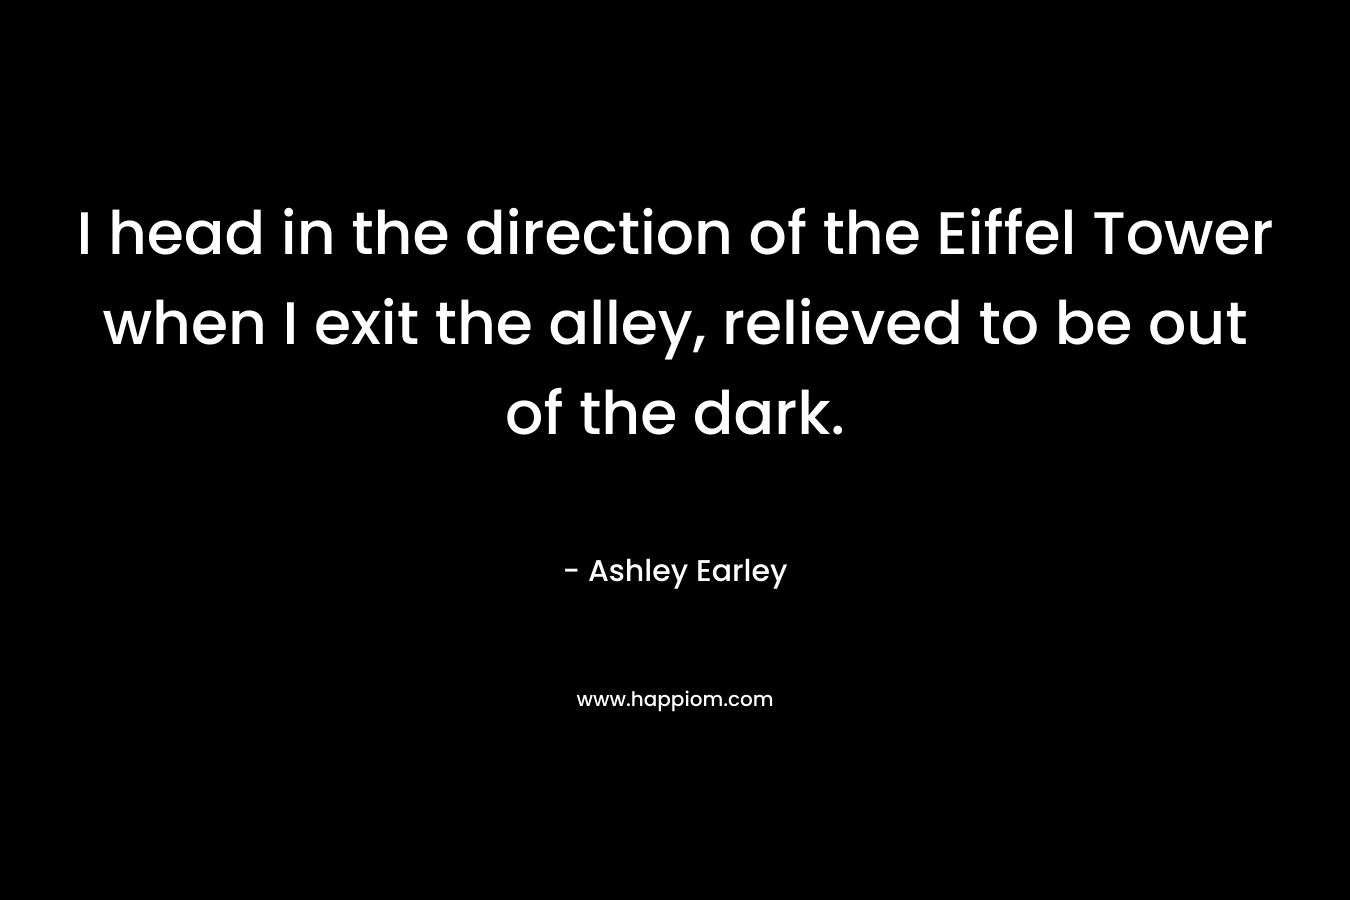 I head in the direction of the Eiffel Tower when I exit the alley, relieved to be out of the dark. – Ashley Earley